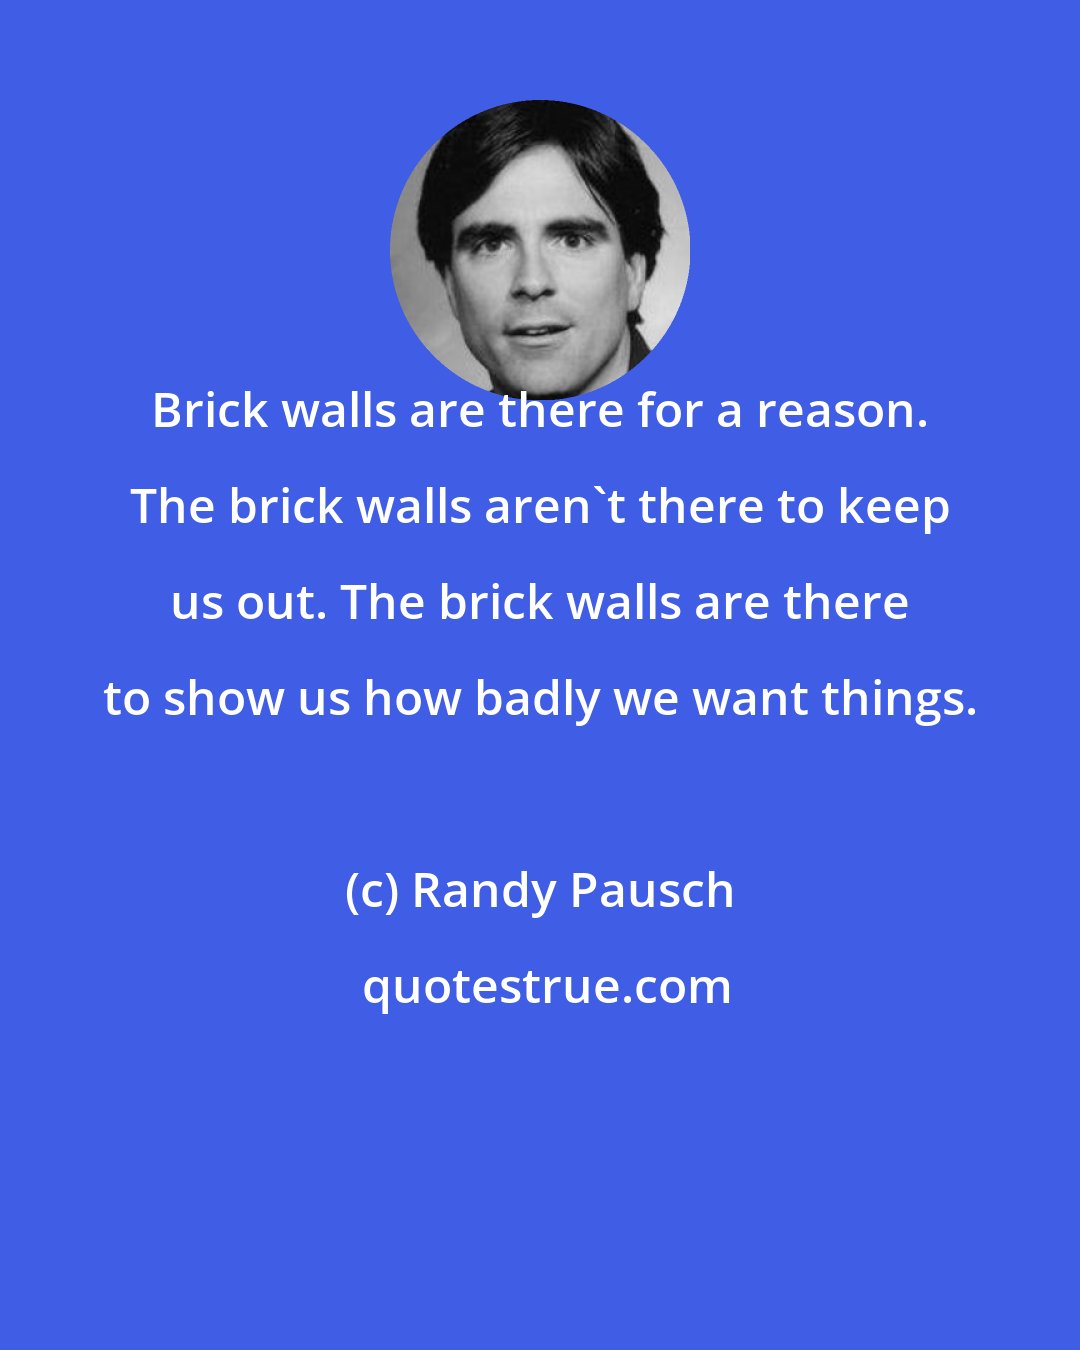 Randy Pausch: Brick walls are there for a reason. The brick walls aren't there to keep us out. The brick walls are there to show us how badly we want things.